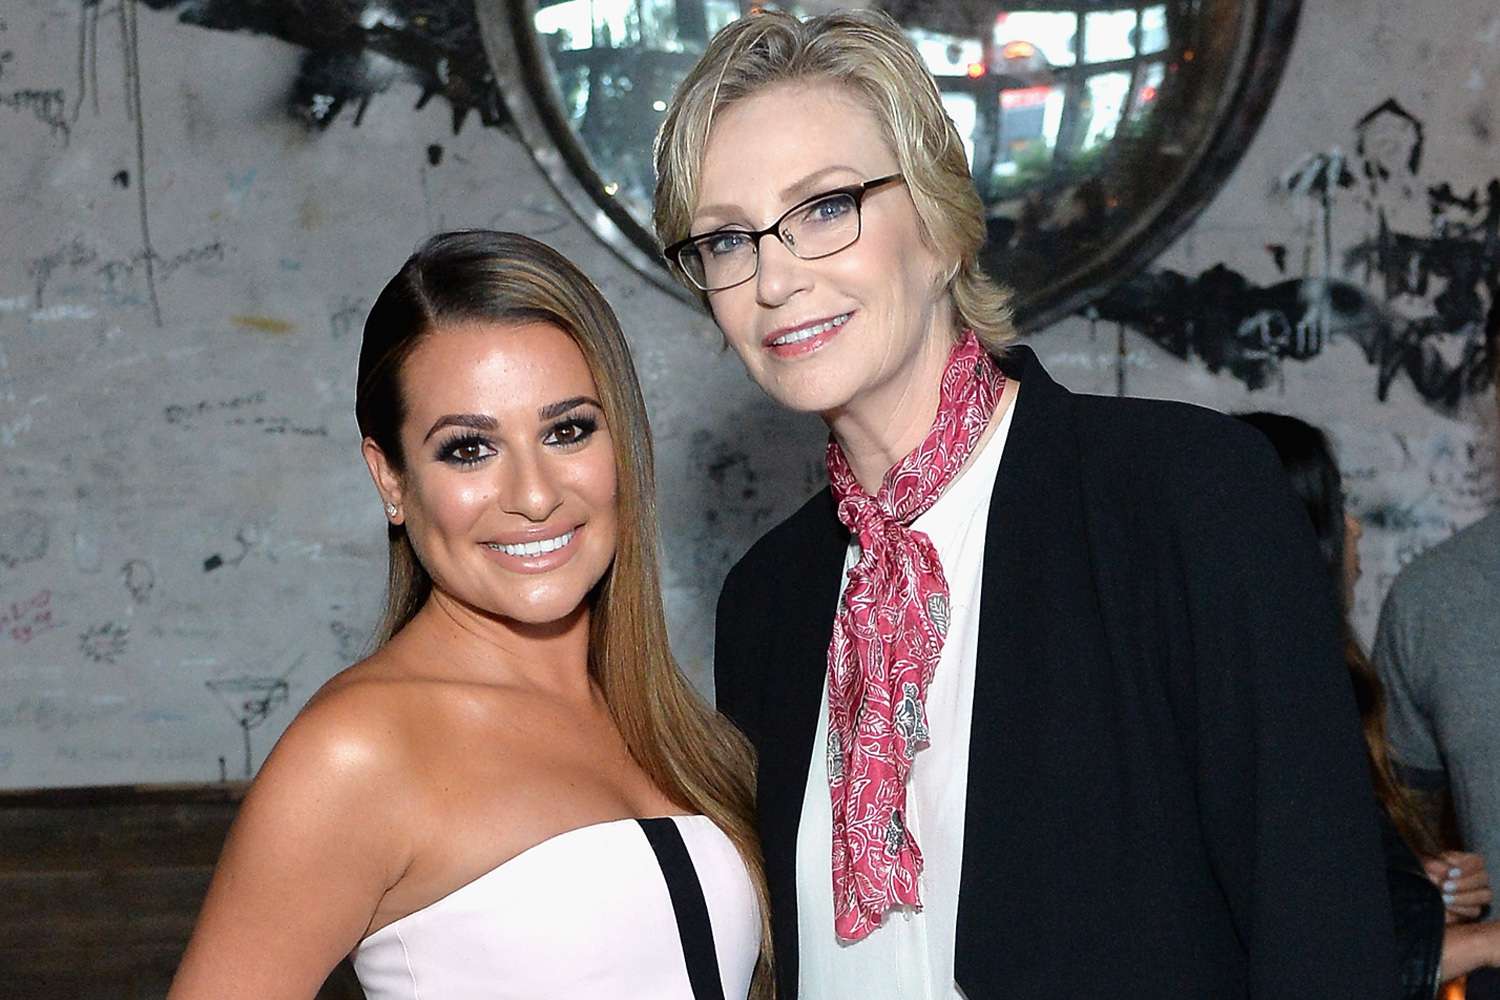 Lea Michele and Jane Lynch attend the Women In Comedy event